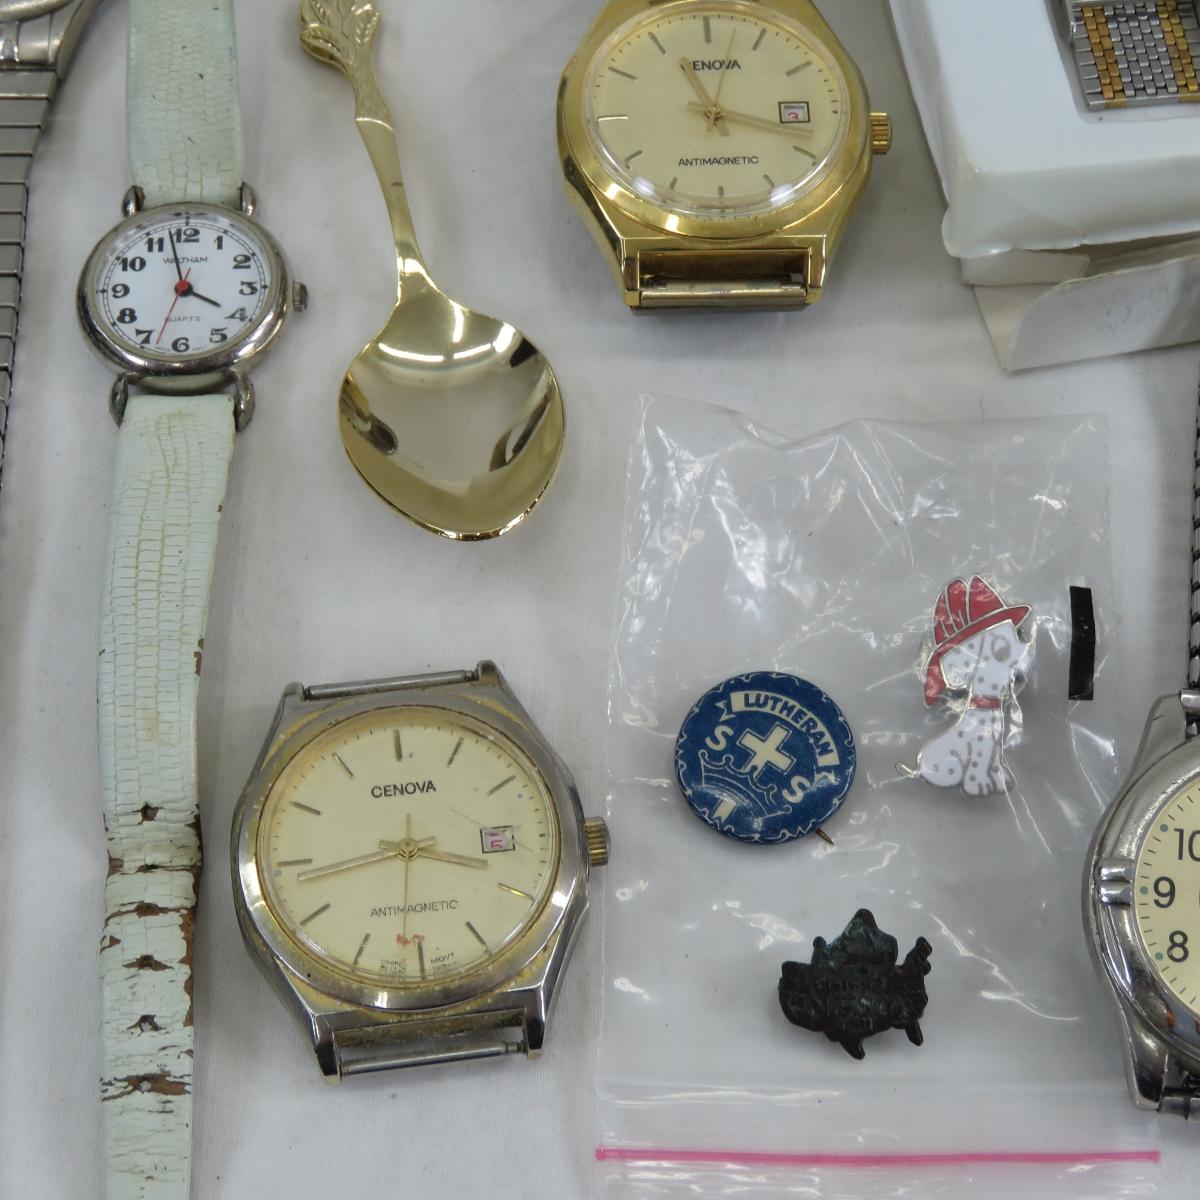 Vintage Watches & Other Smalls